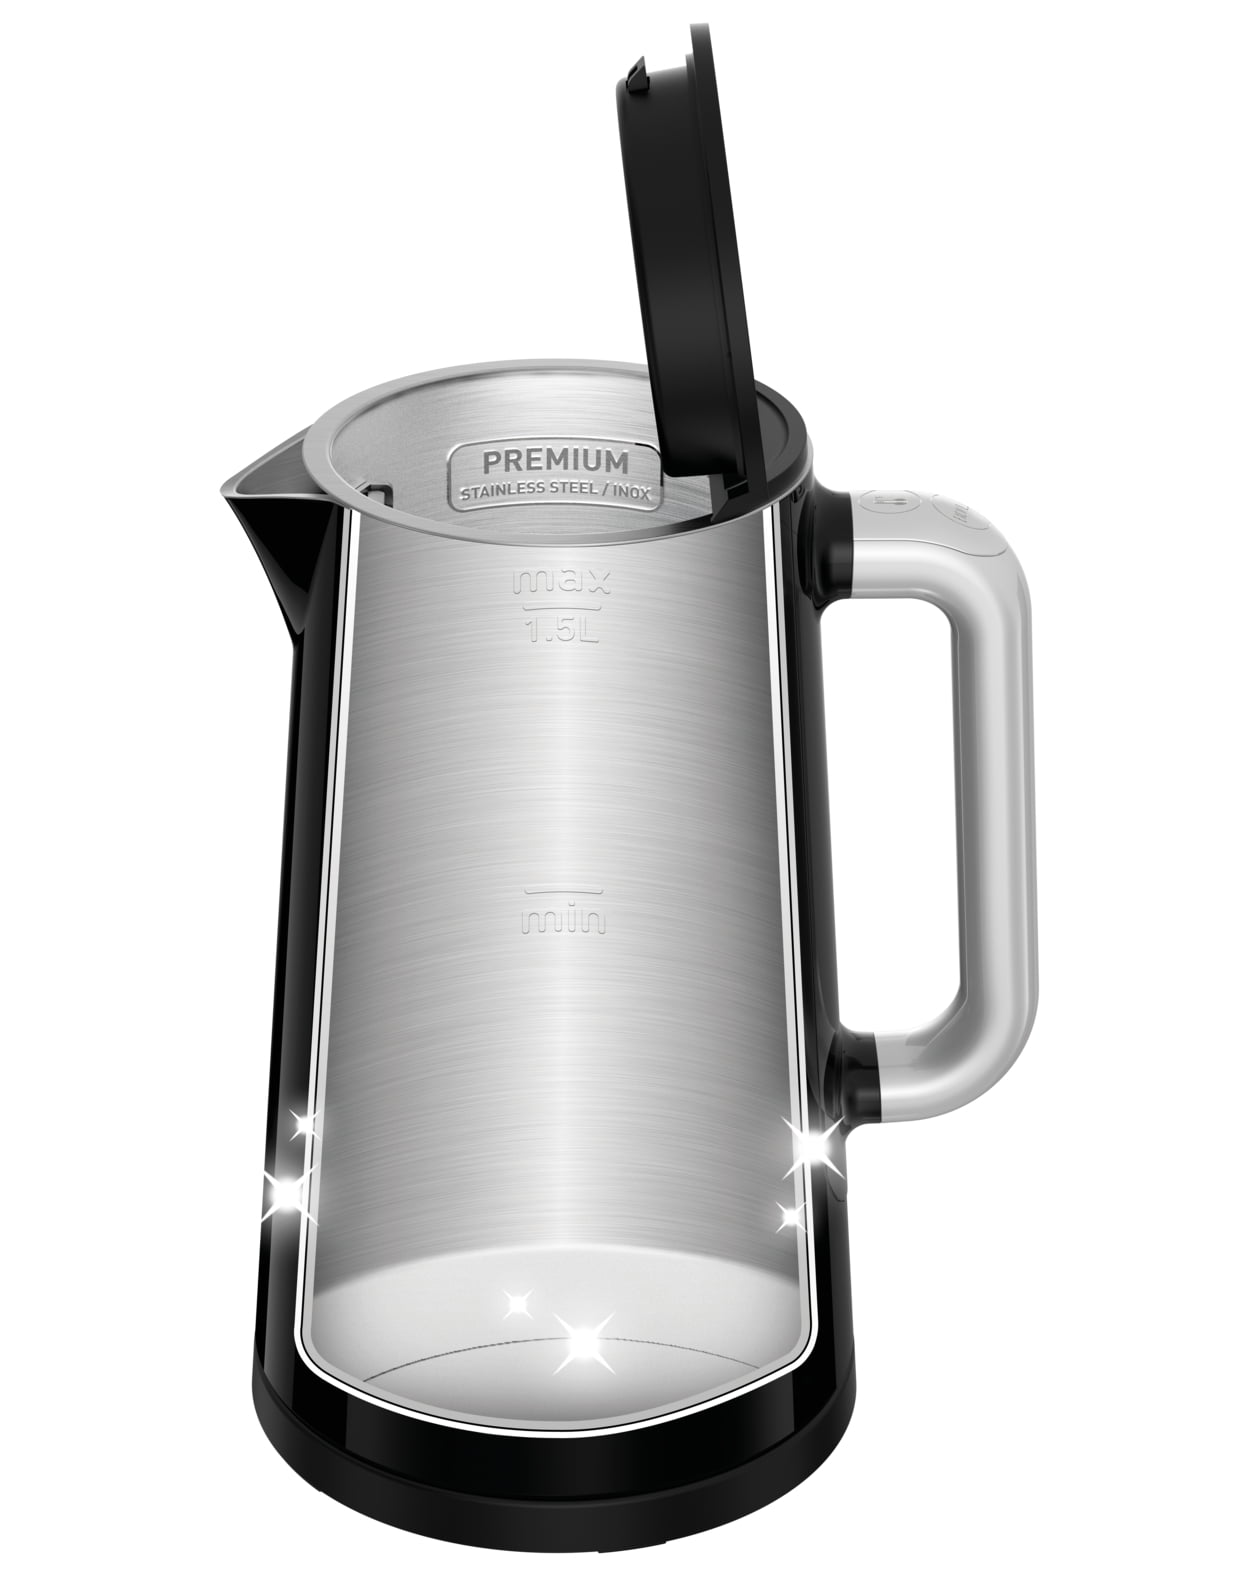 KRUPS BW500 1.75 Quart Electric Tea Kettle, Stainless Steel